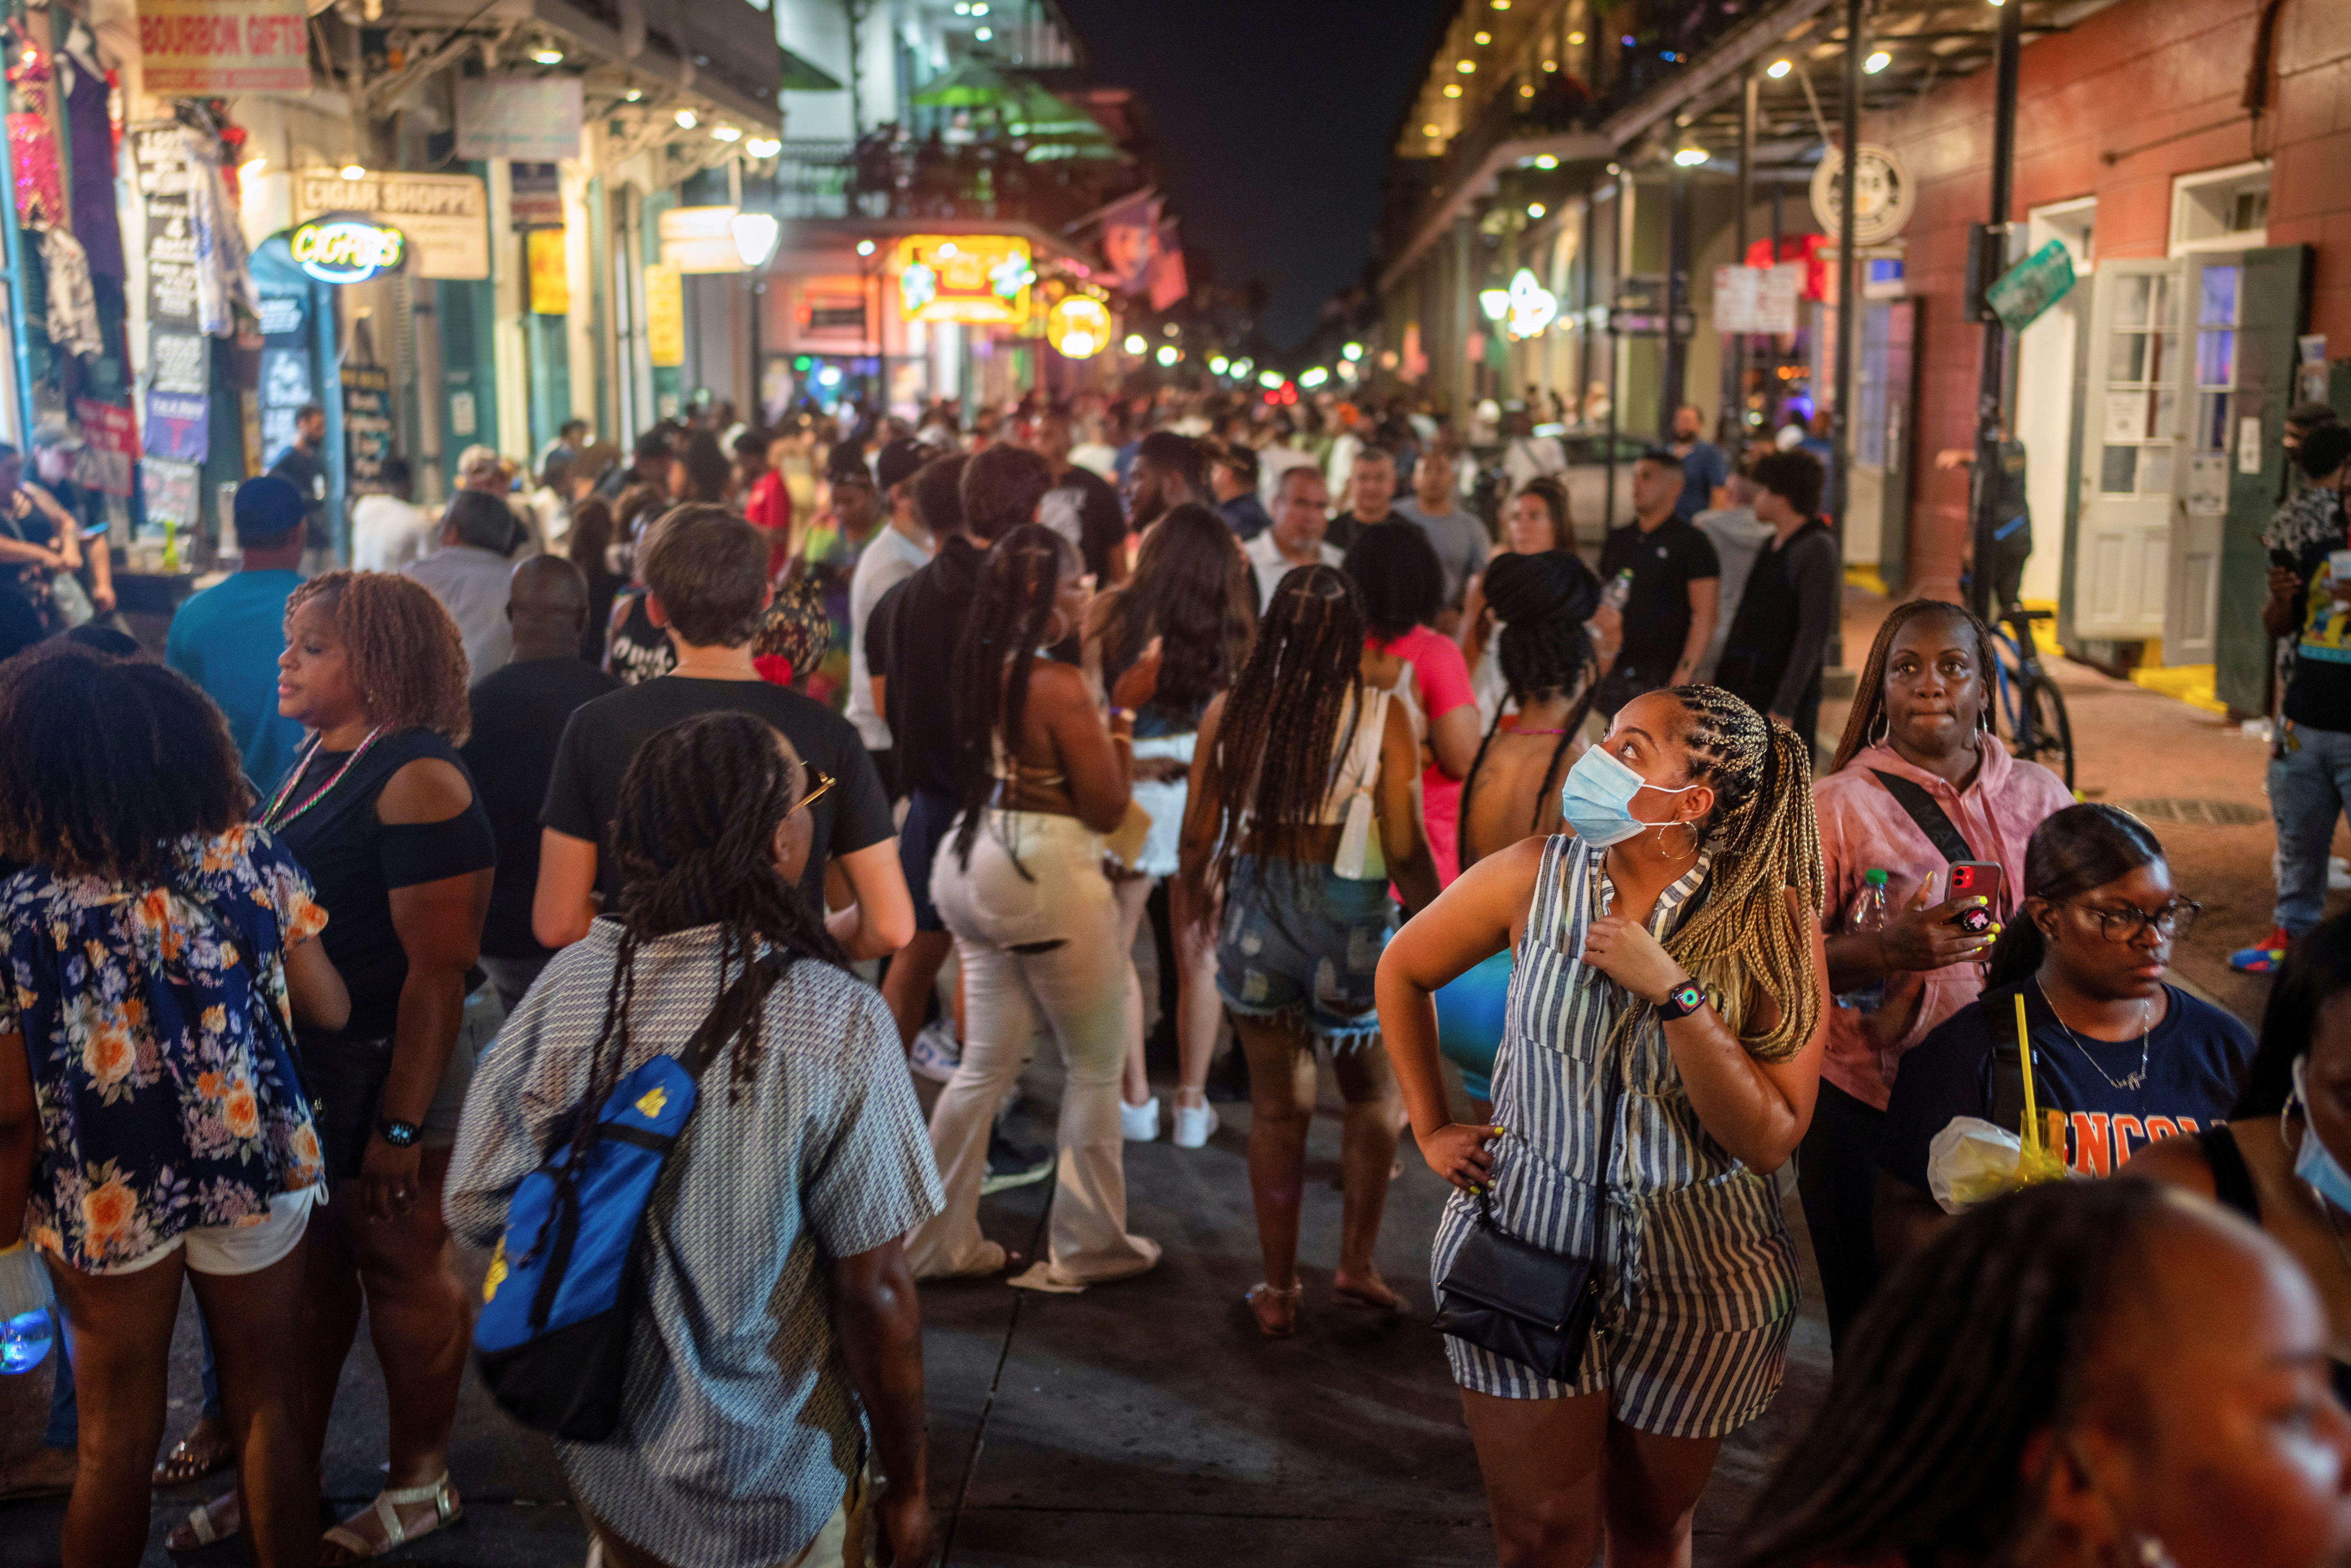 Revelers crowd the French Quarter as Louisiana's COVID-19 cases rise amid Delta variant, in New Orleans